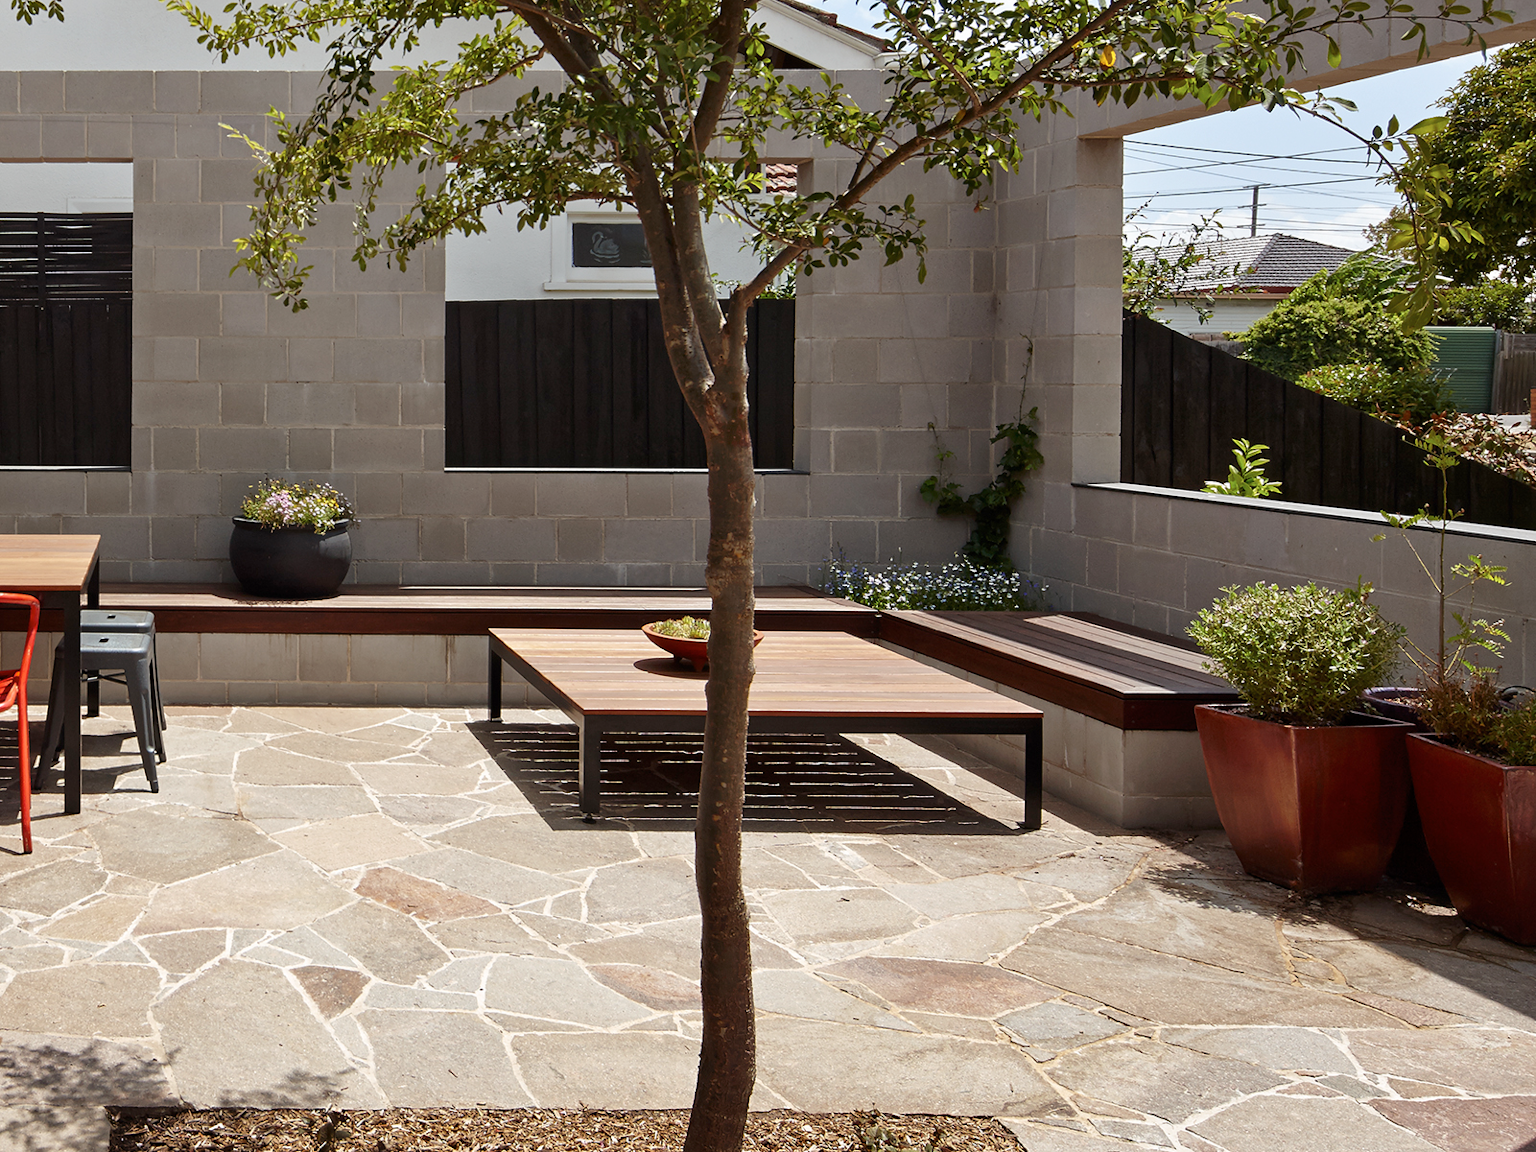 View of external courtyard with porphyry crazy paving